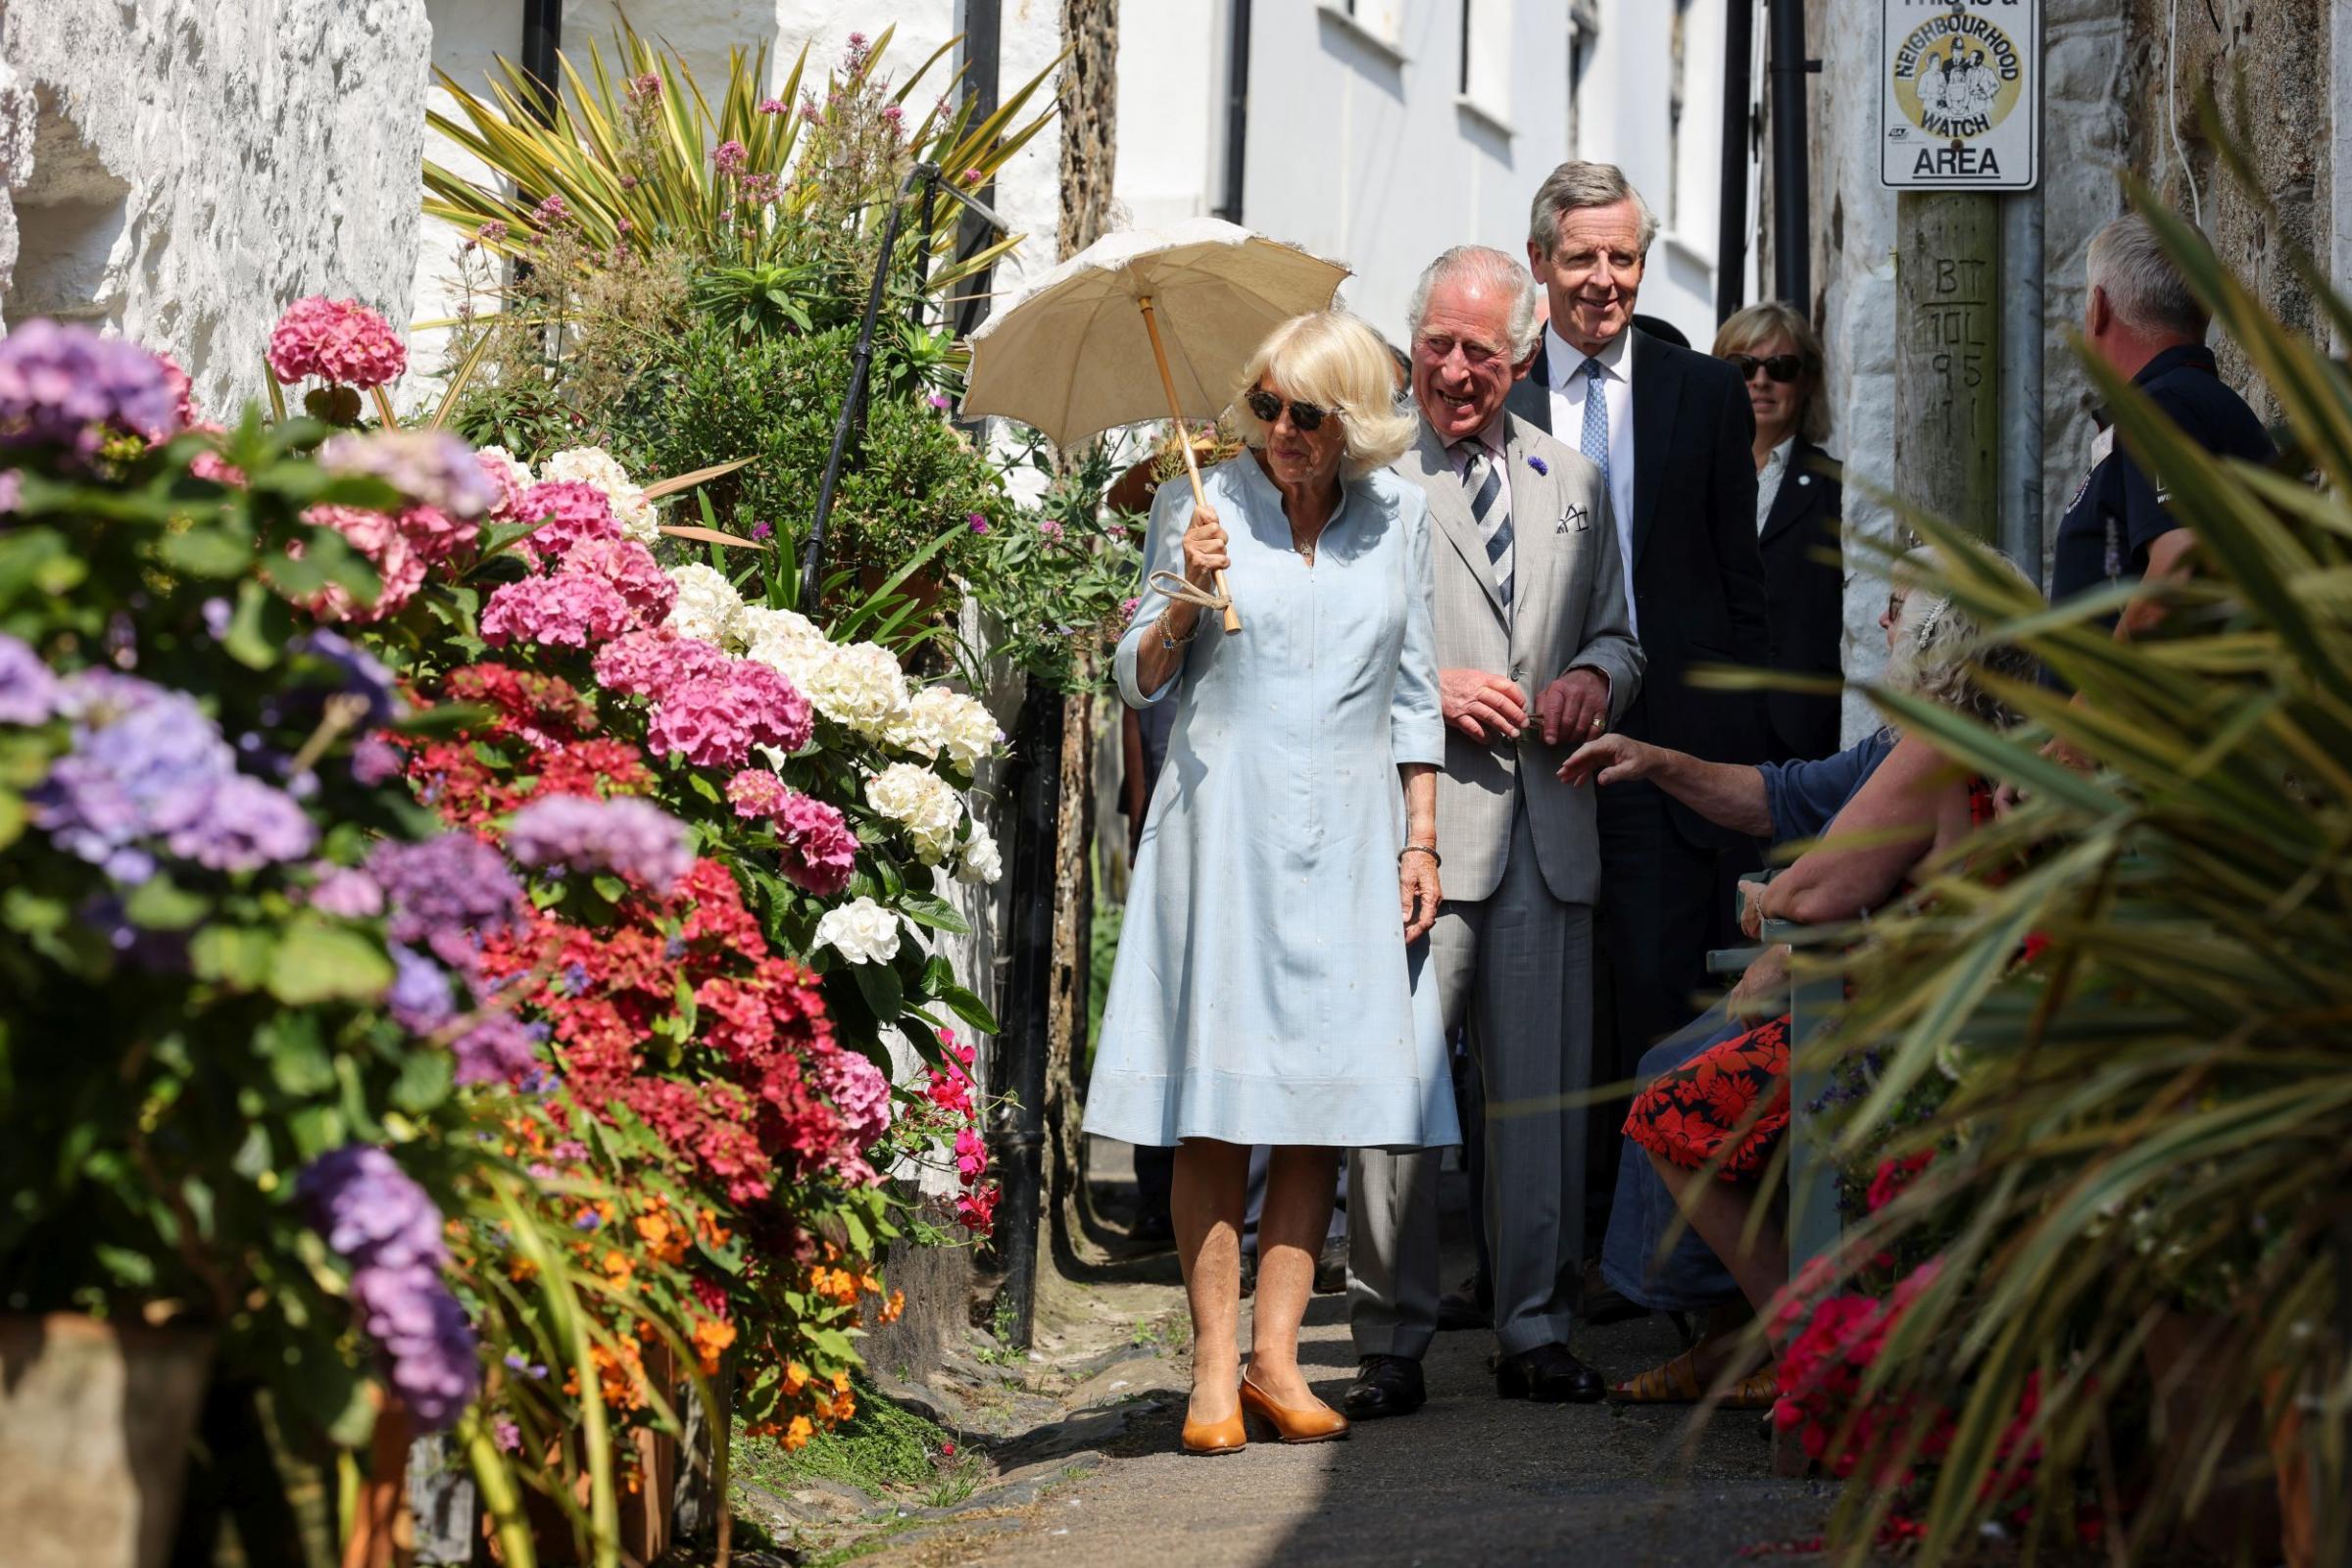 The royal couple get a tour of Mousehole Picture: Greg Martin / Cornwall Live